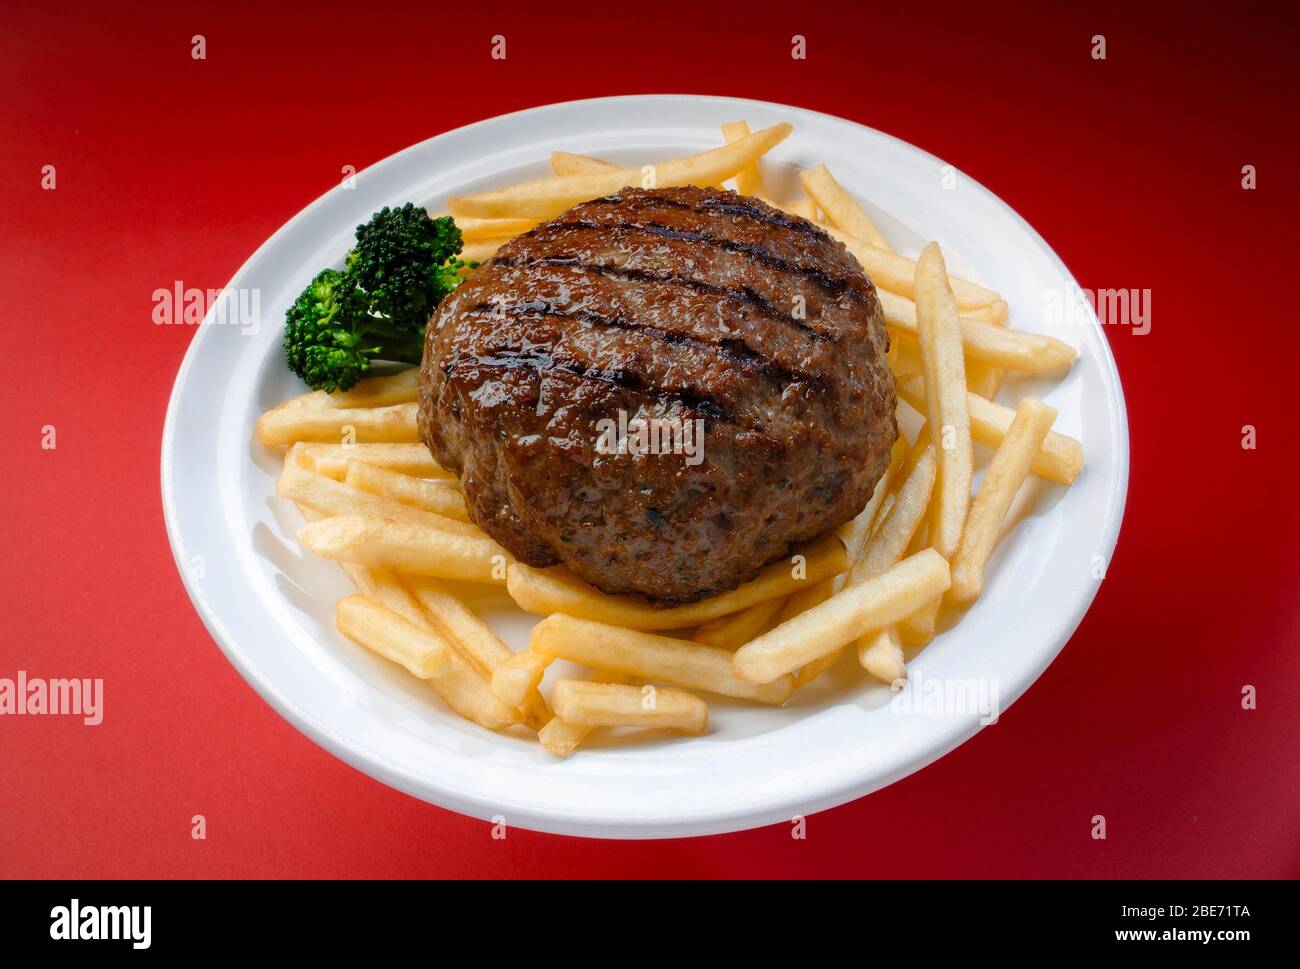 Delicious hamburger plate with french fries and broccoli Stock Photo